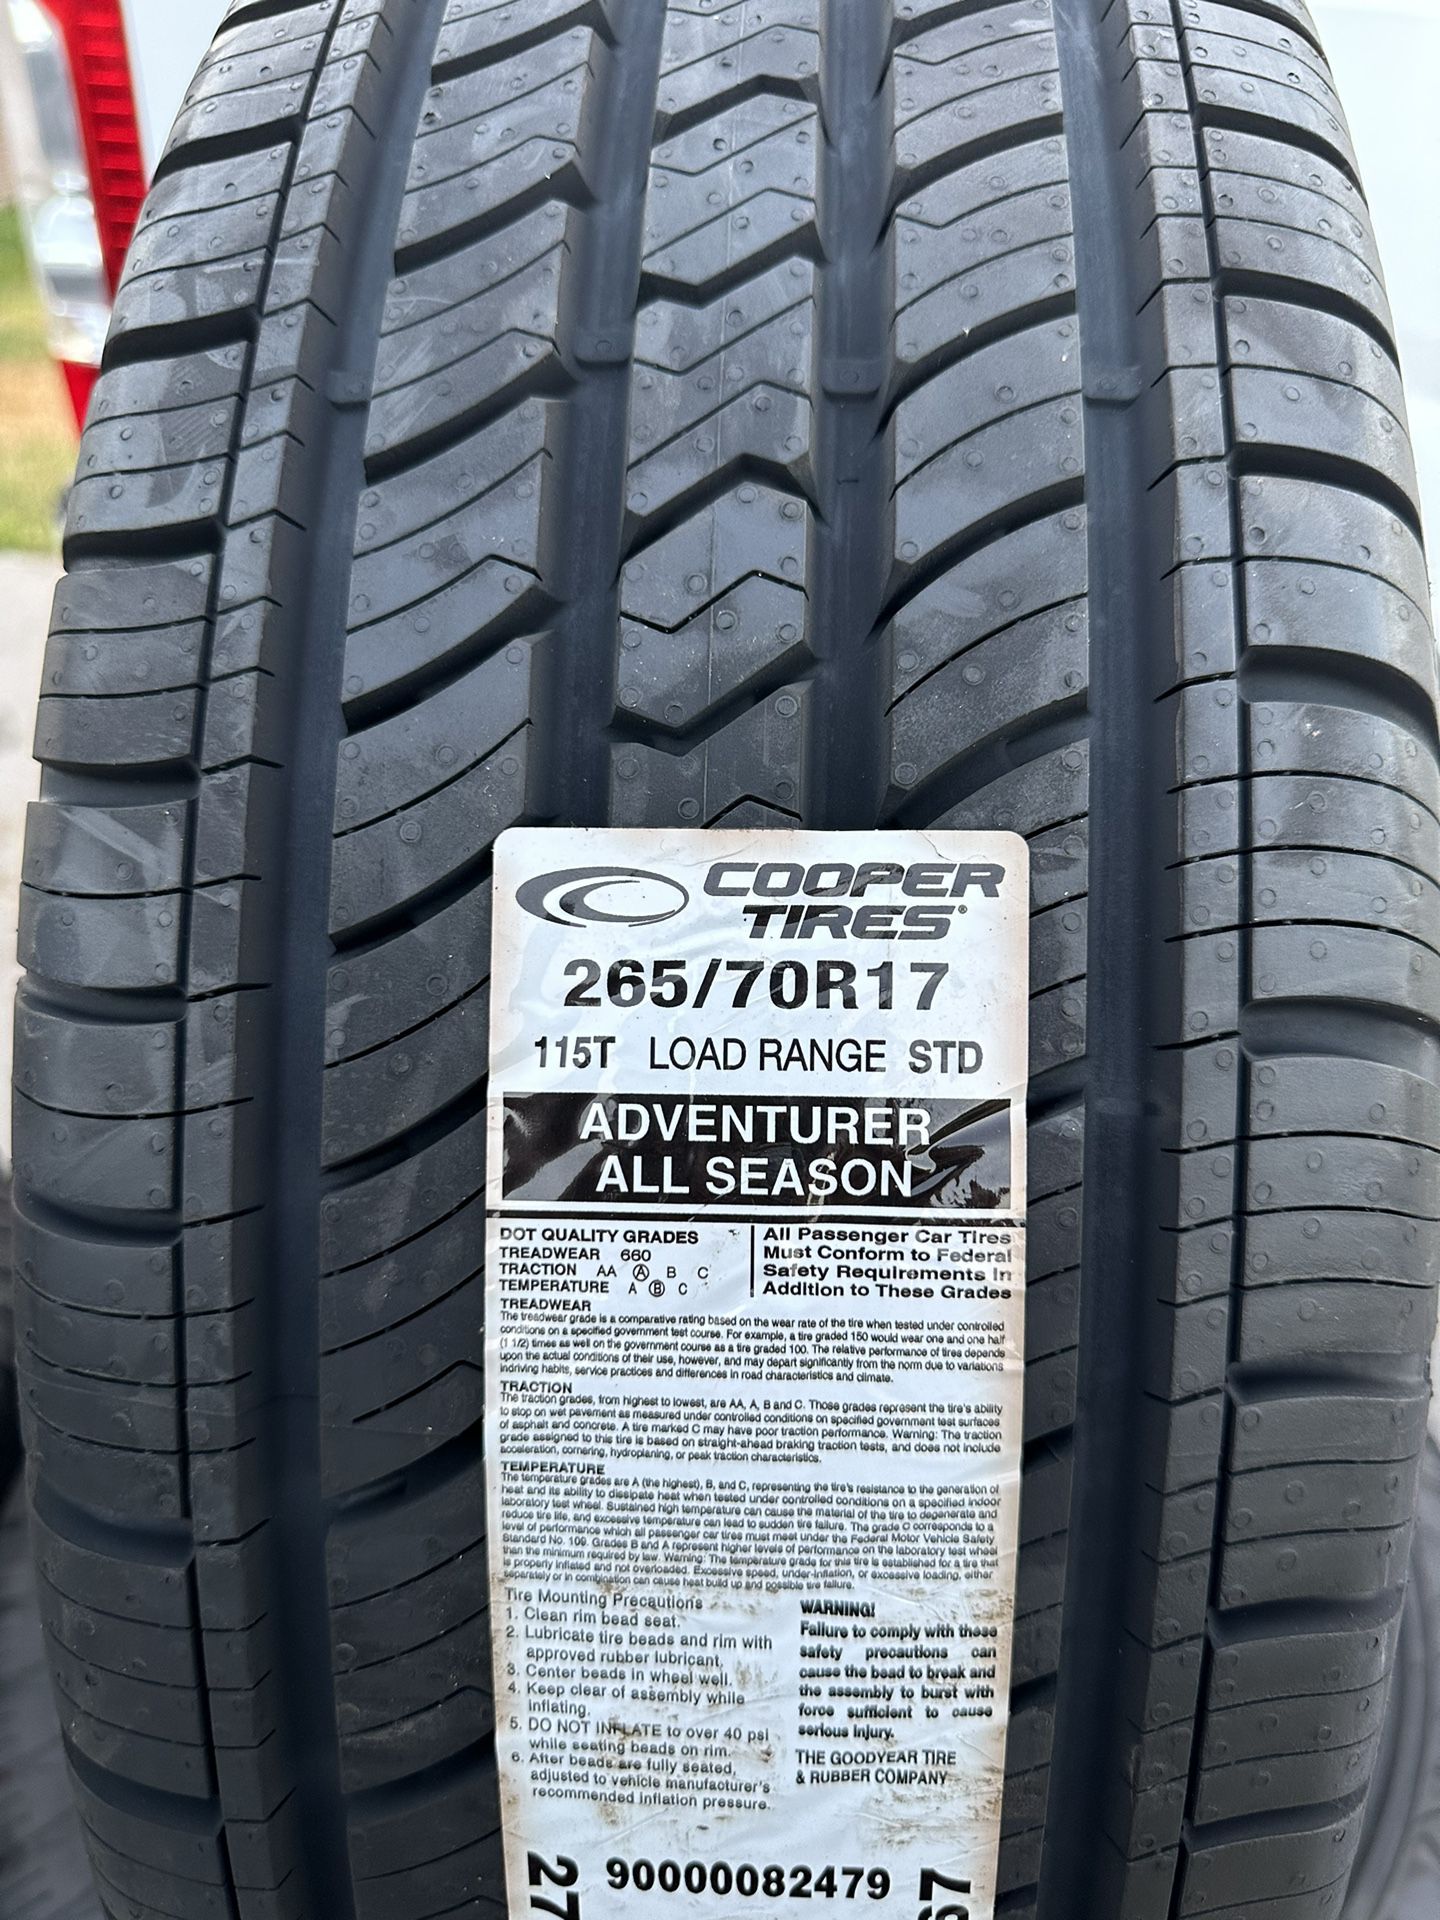 Psi for 265/70R17 Tires: Inflate for Peak Performance!